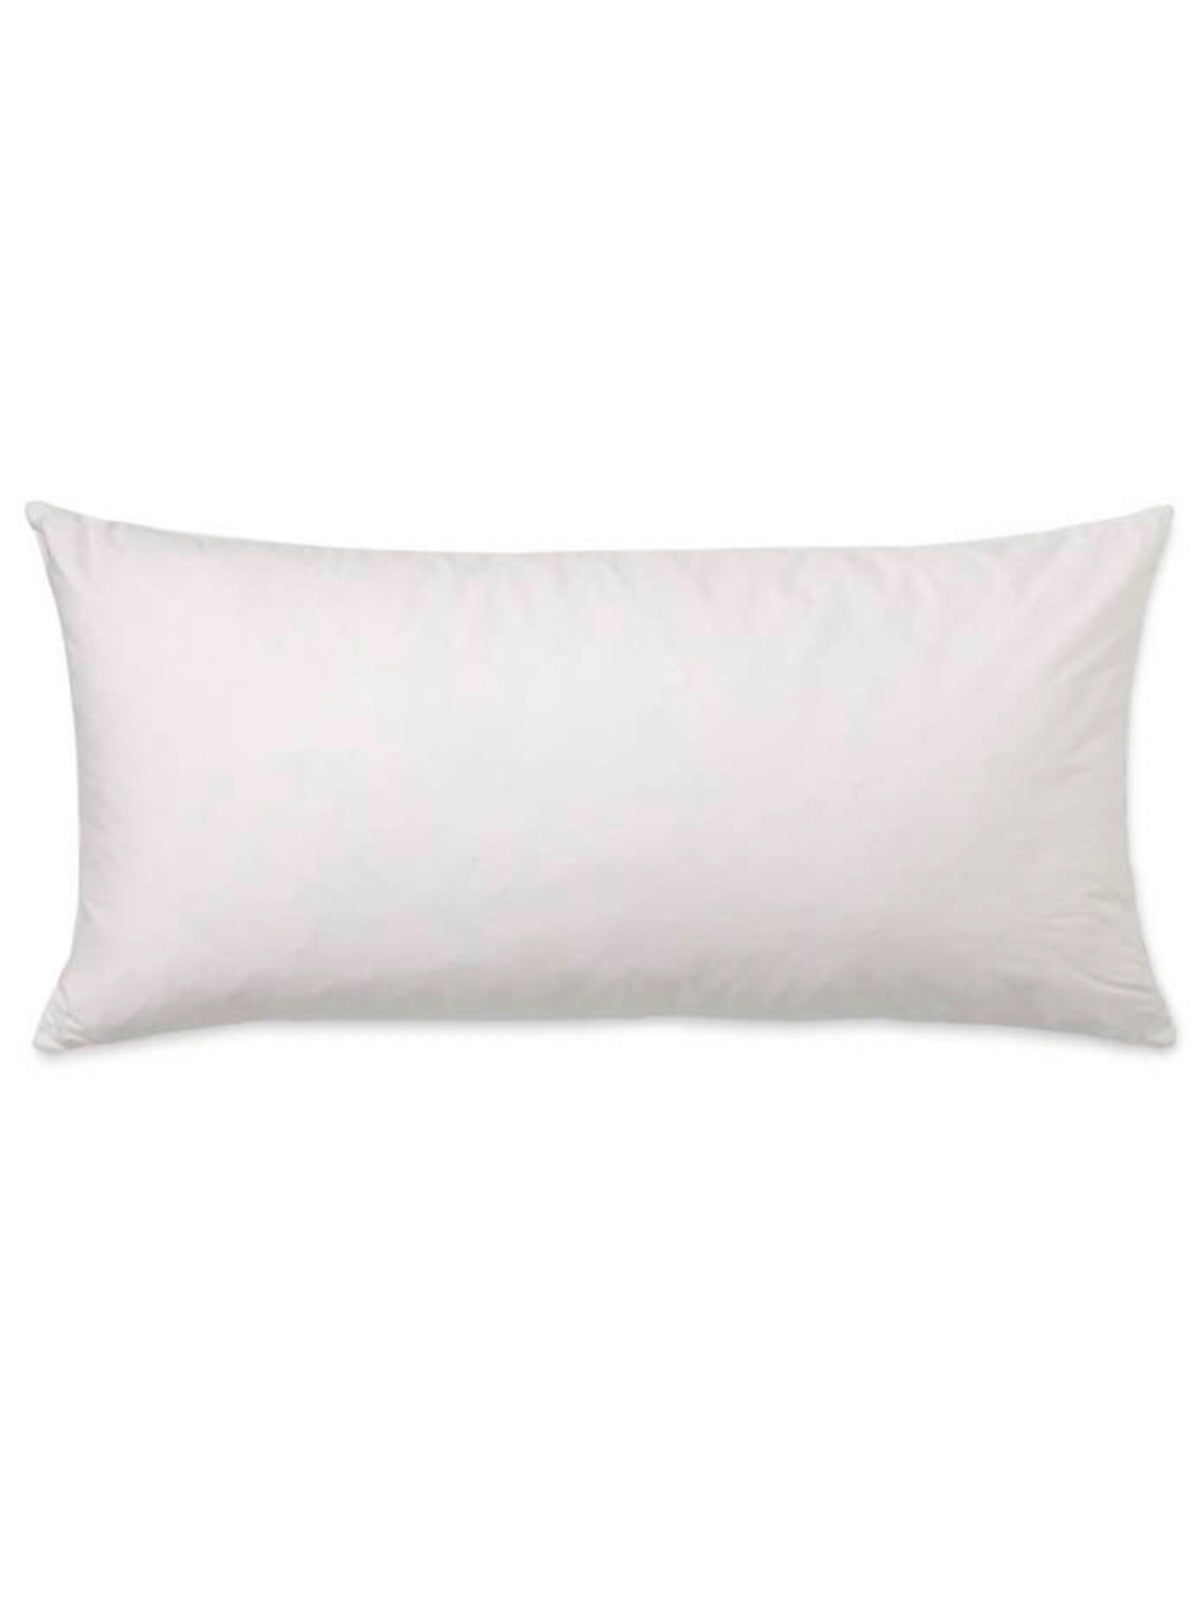 These Plush Poly inserts have a 100% cotton outer fabric and filled with a high-quality poly plush filling. These pillow inserts have a soft pliable feel that can be molded 